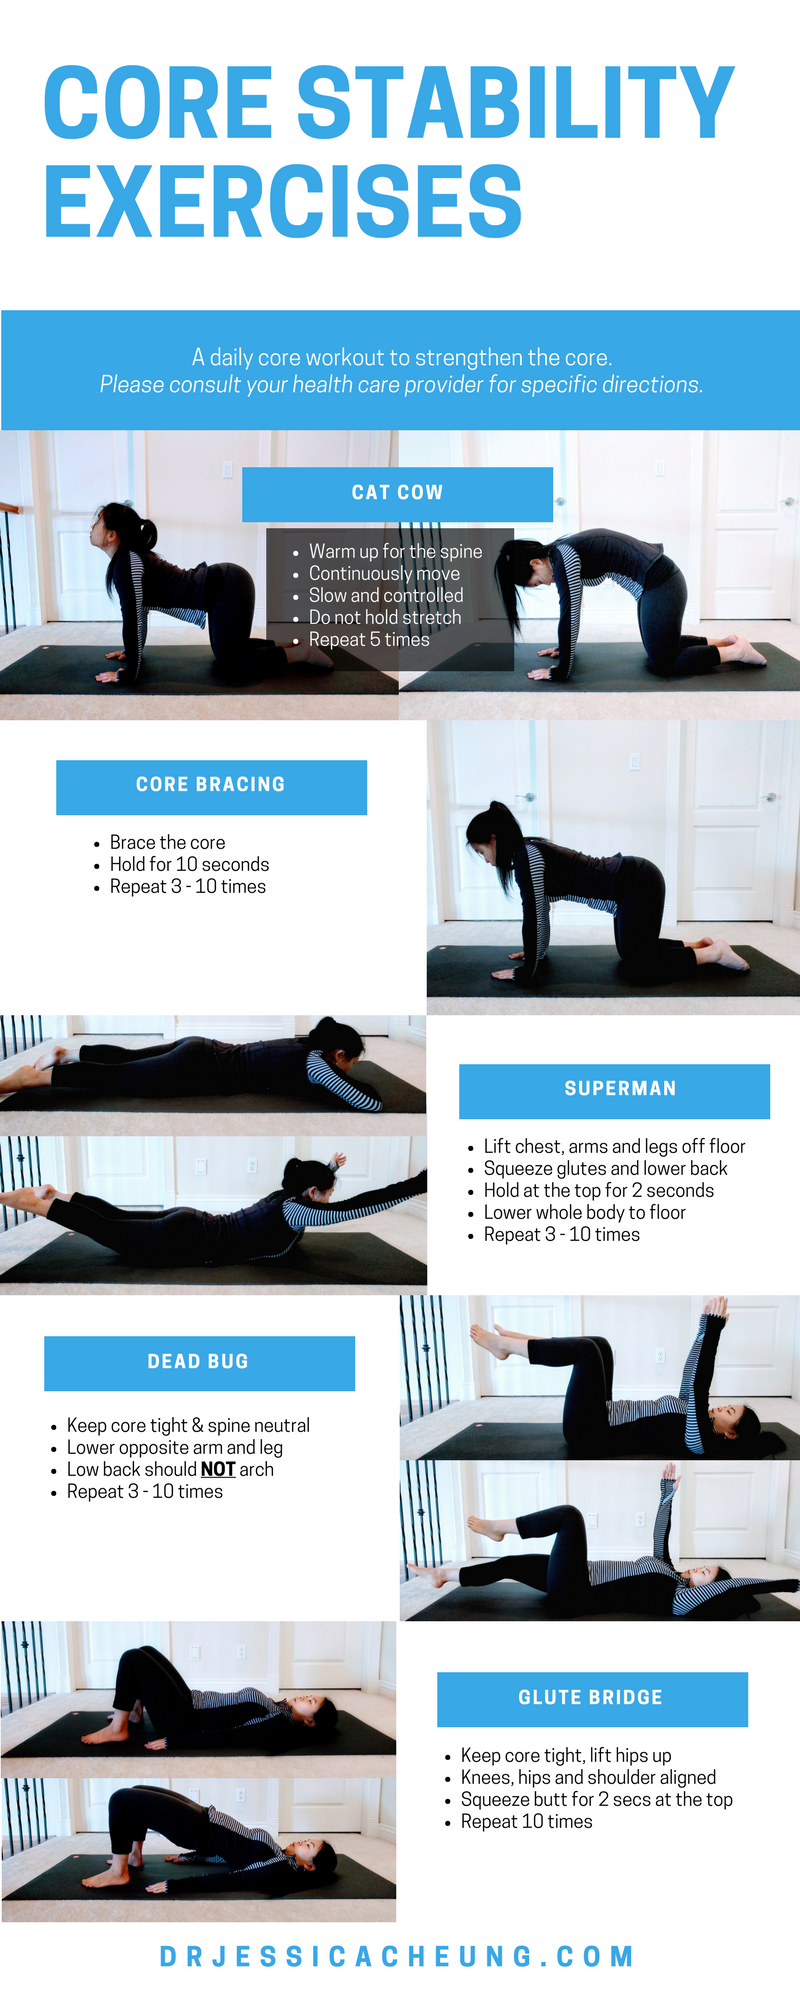 Weekly Health Tip: Core Stability Exercises - Back In Action Medical Center